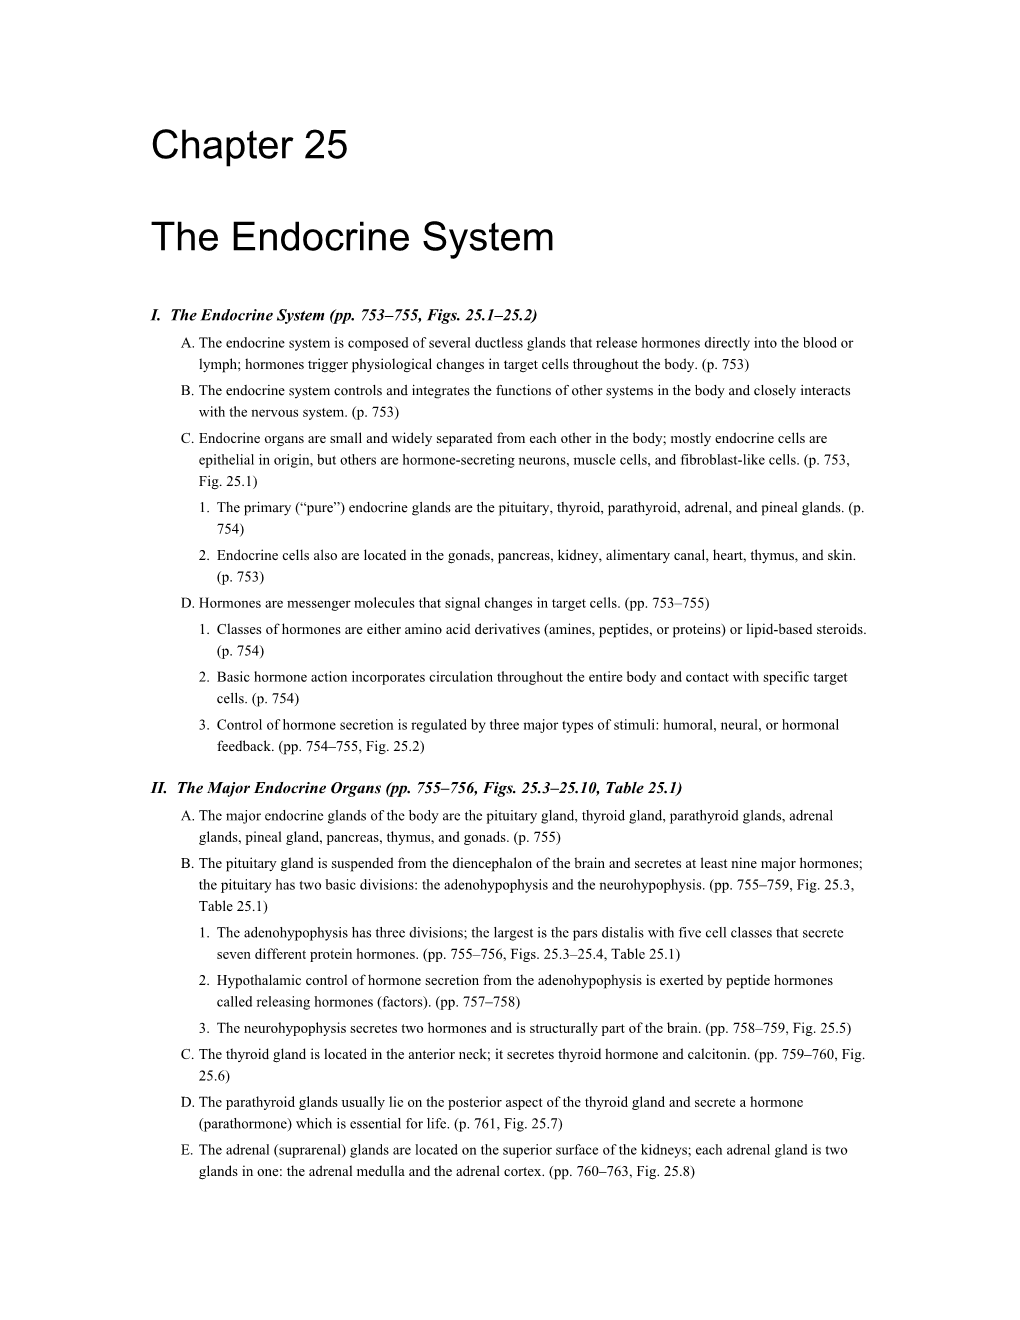 I. the Endocrine System (Pp. 753 755, Figs. 25.1 25.2)